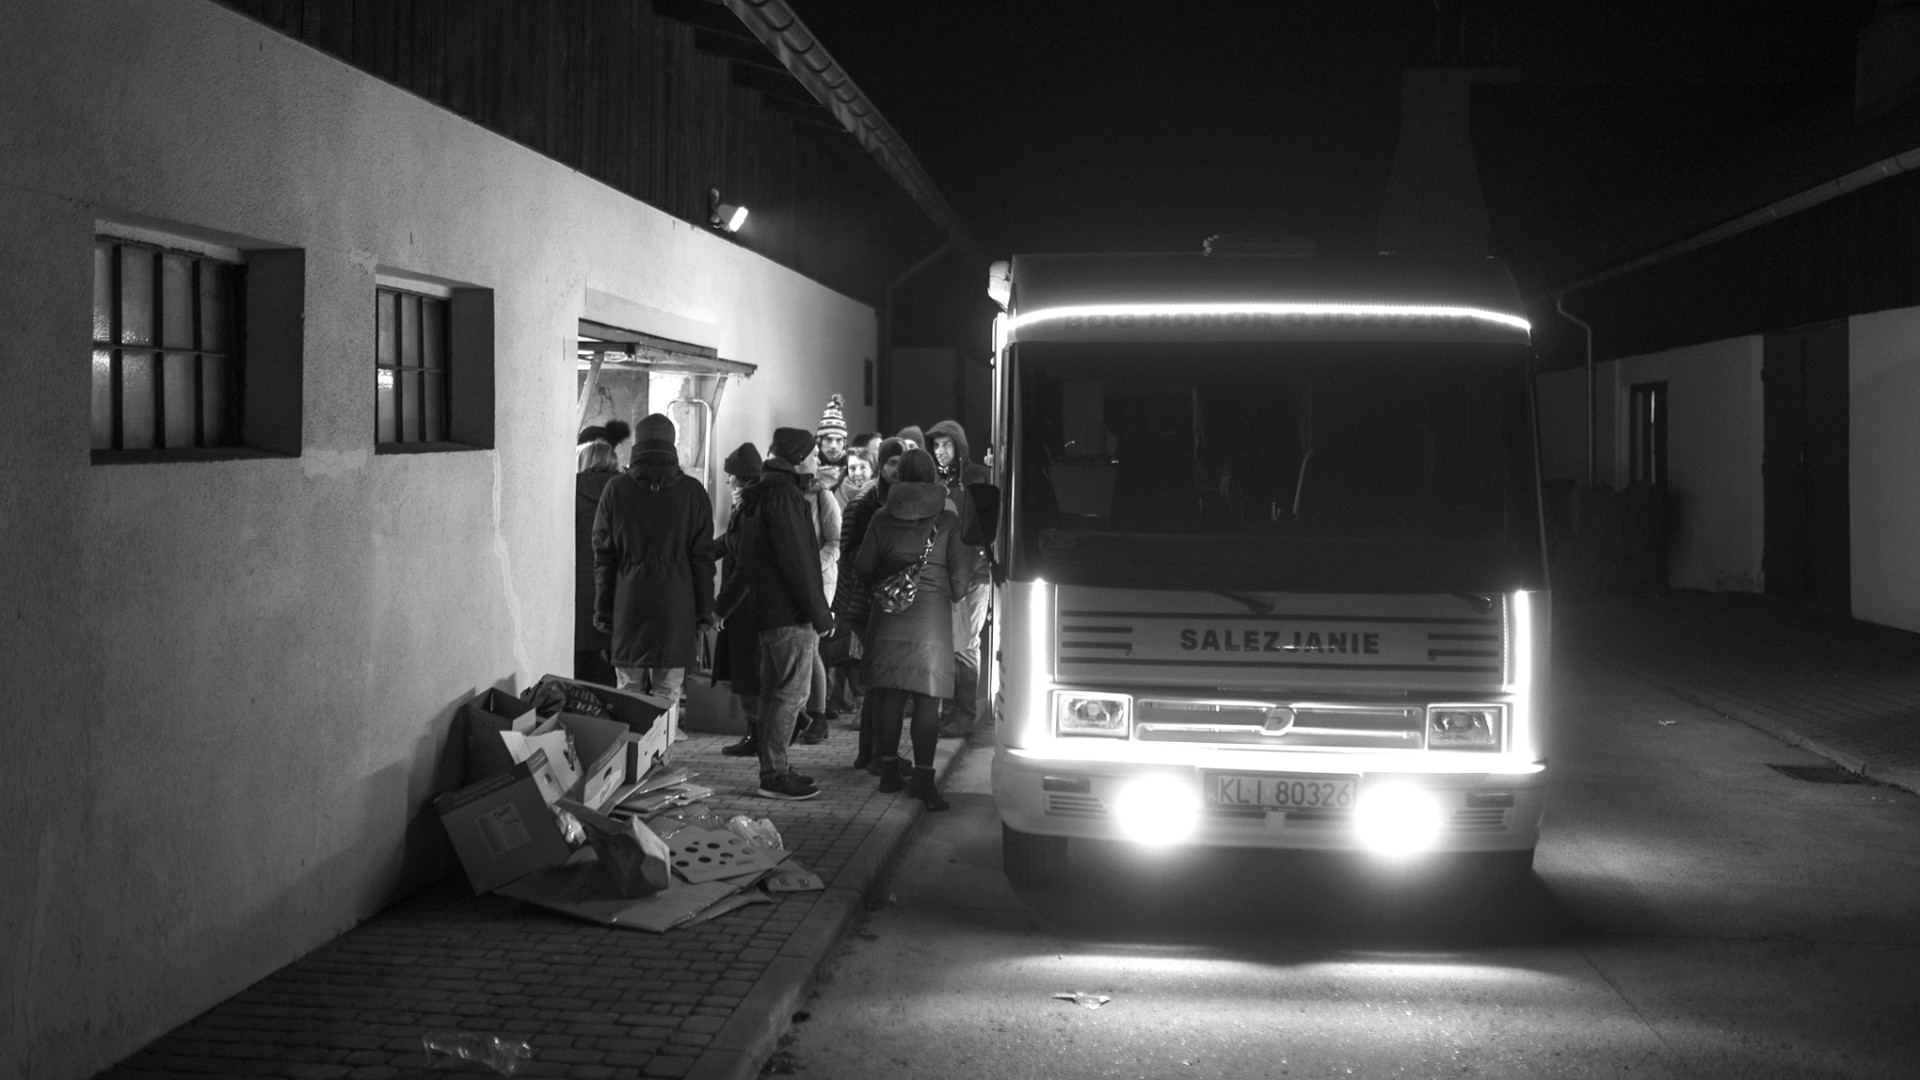 A bus picks up a group of Ukrainians in front of a house in the dark to evacuate them.